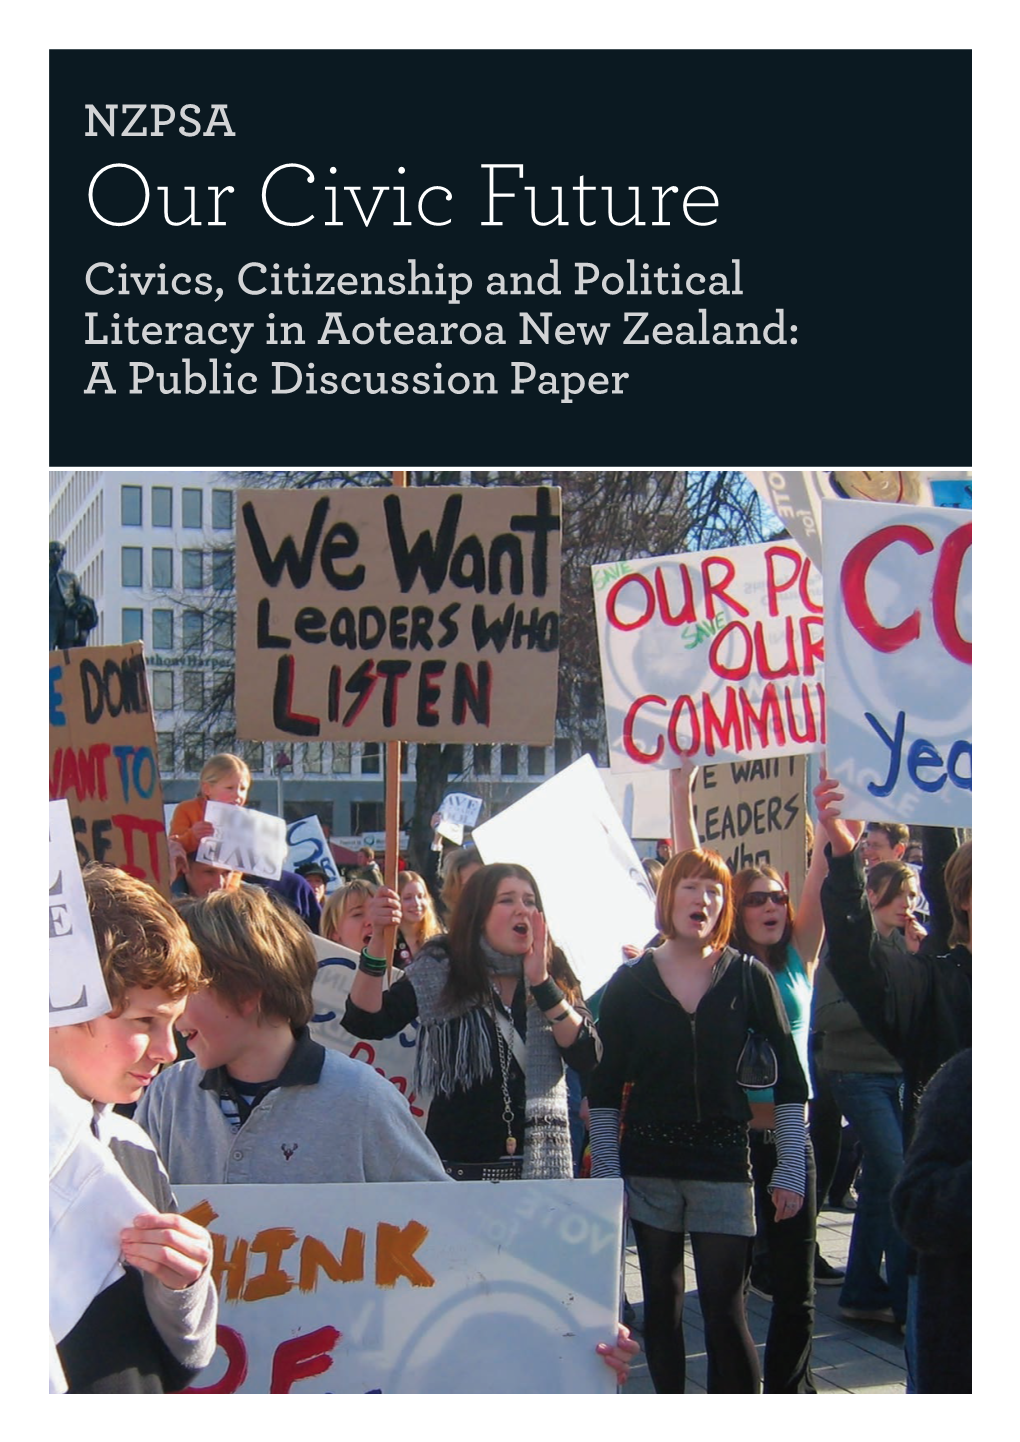 Our Civic Future Civics, Citizenship and Political Literacy in Aotearoa New Zealand: a Public Discussion Paper NZPSA President’S Message